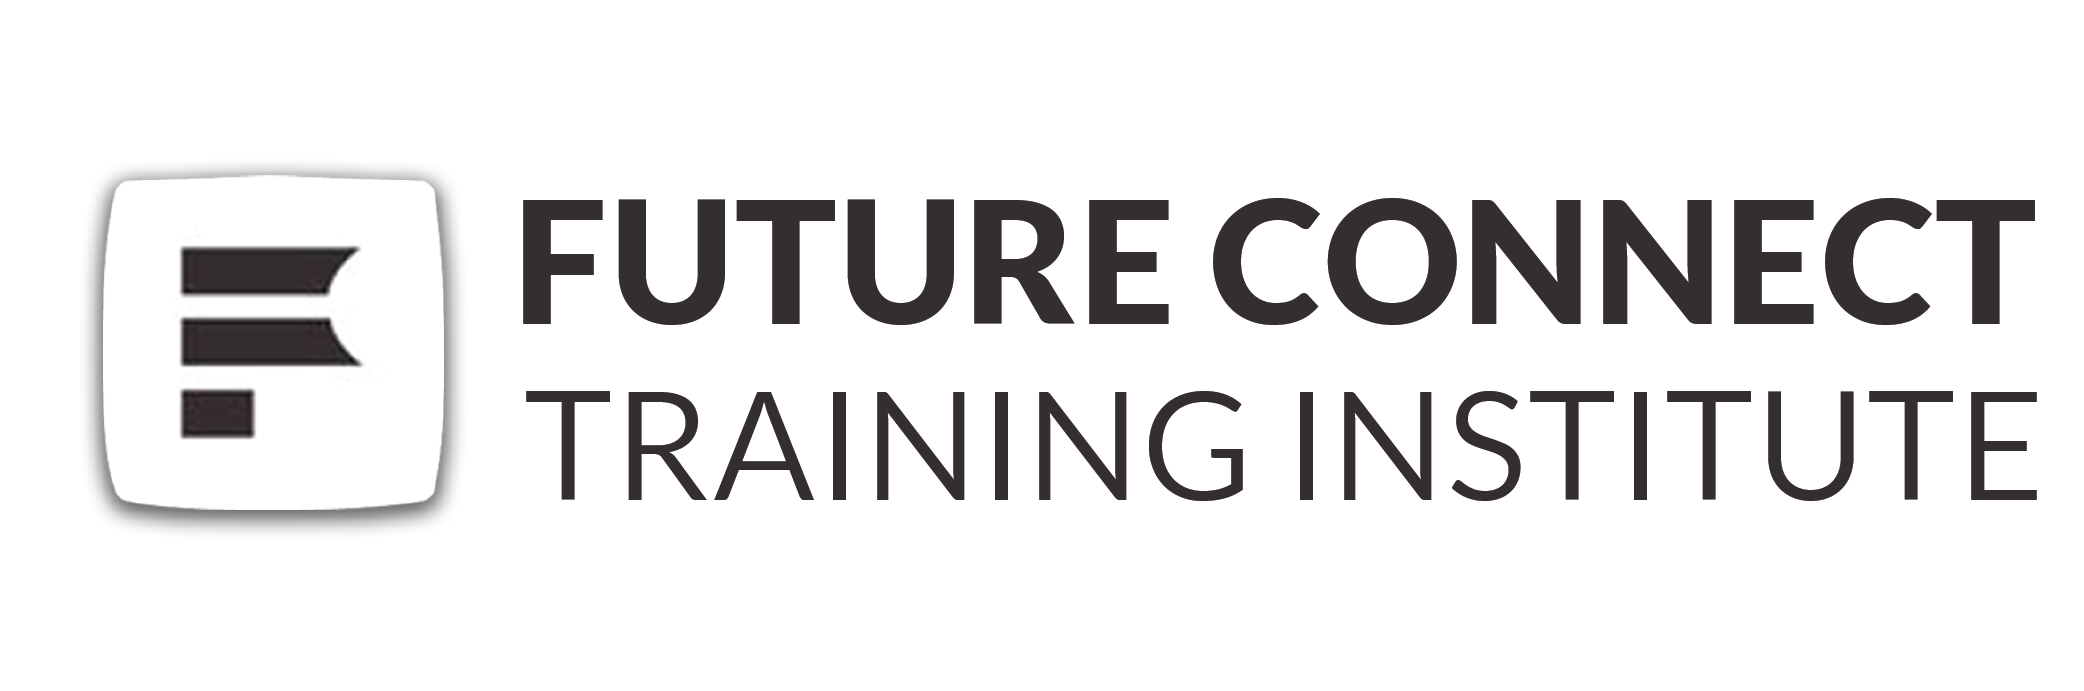 Future Connect Training and Recruitment